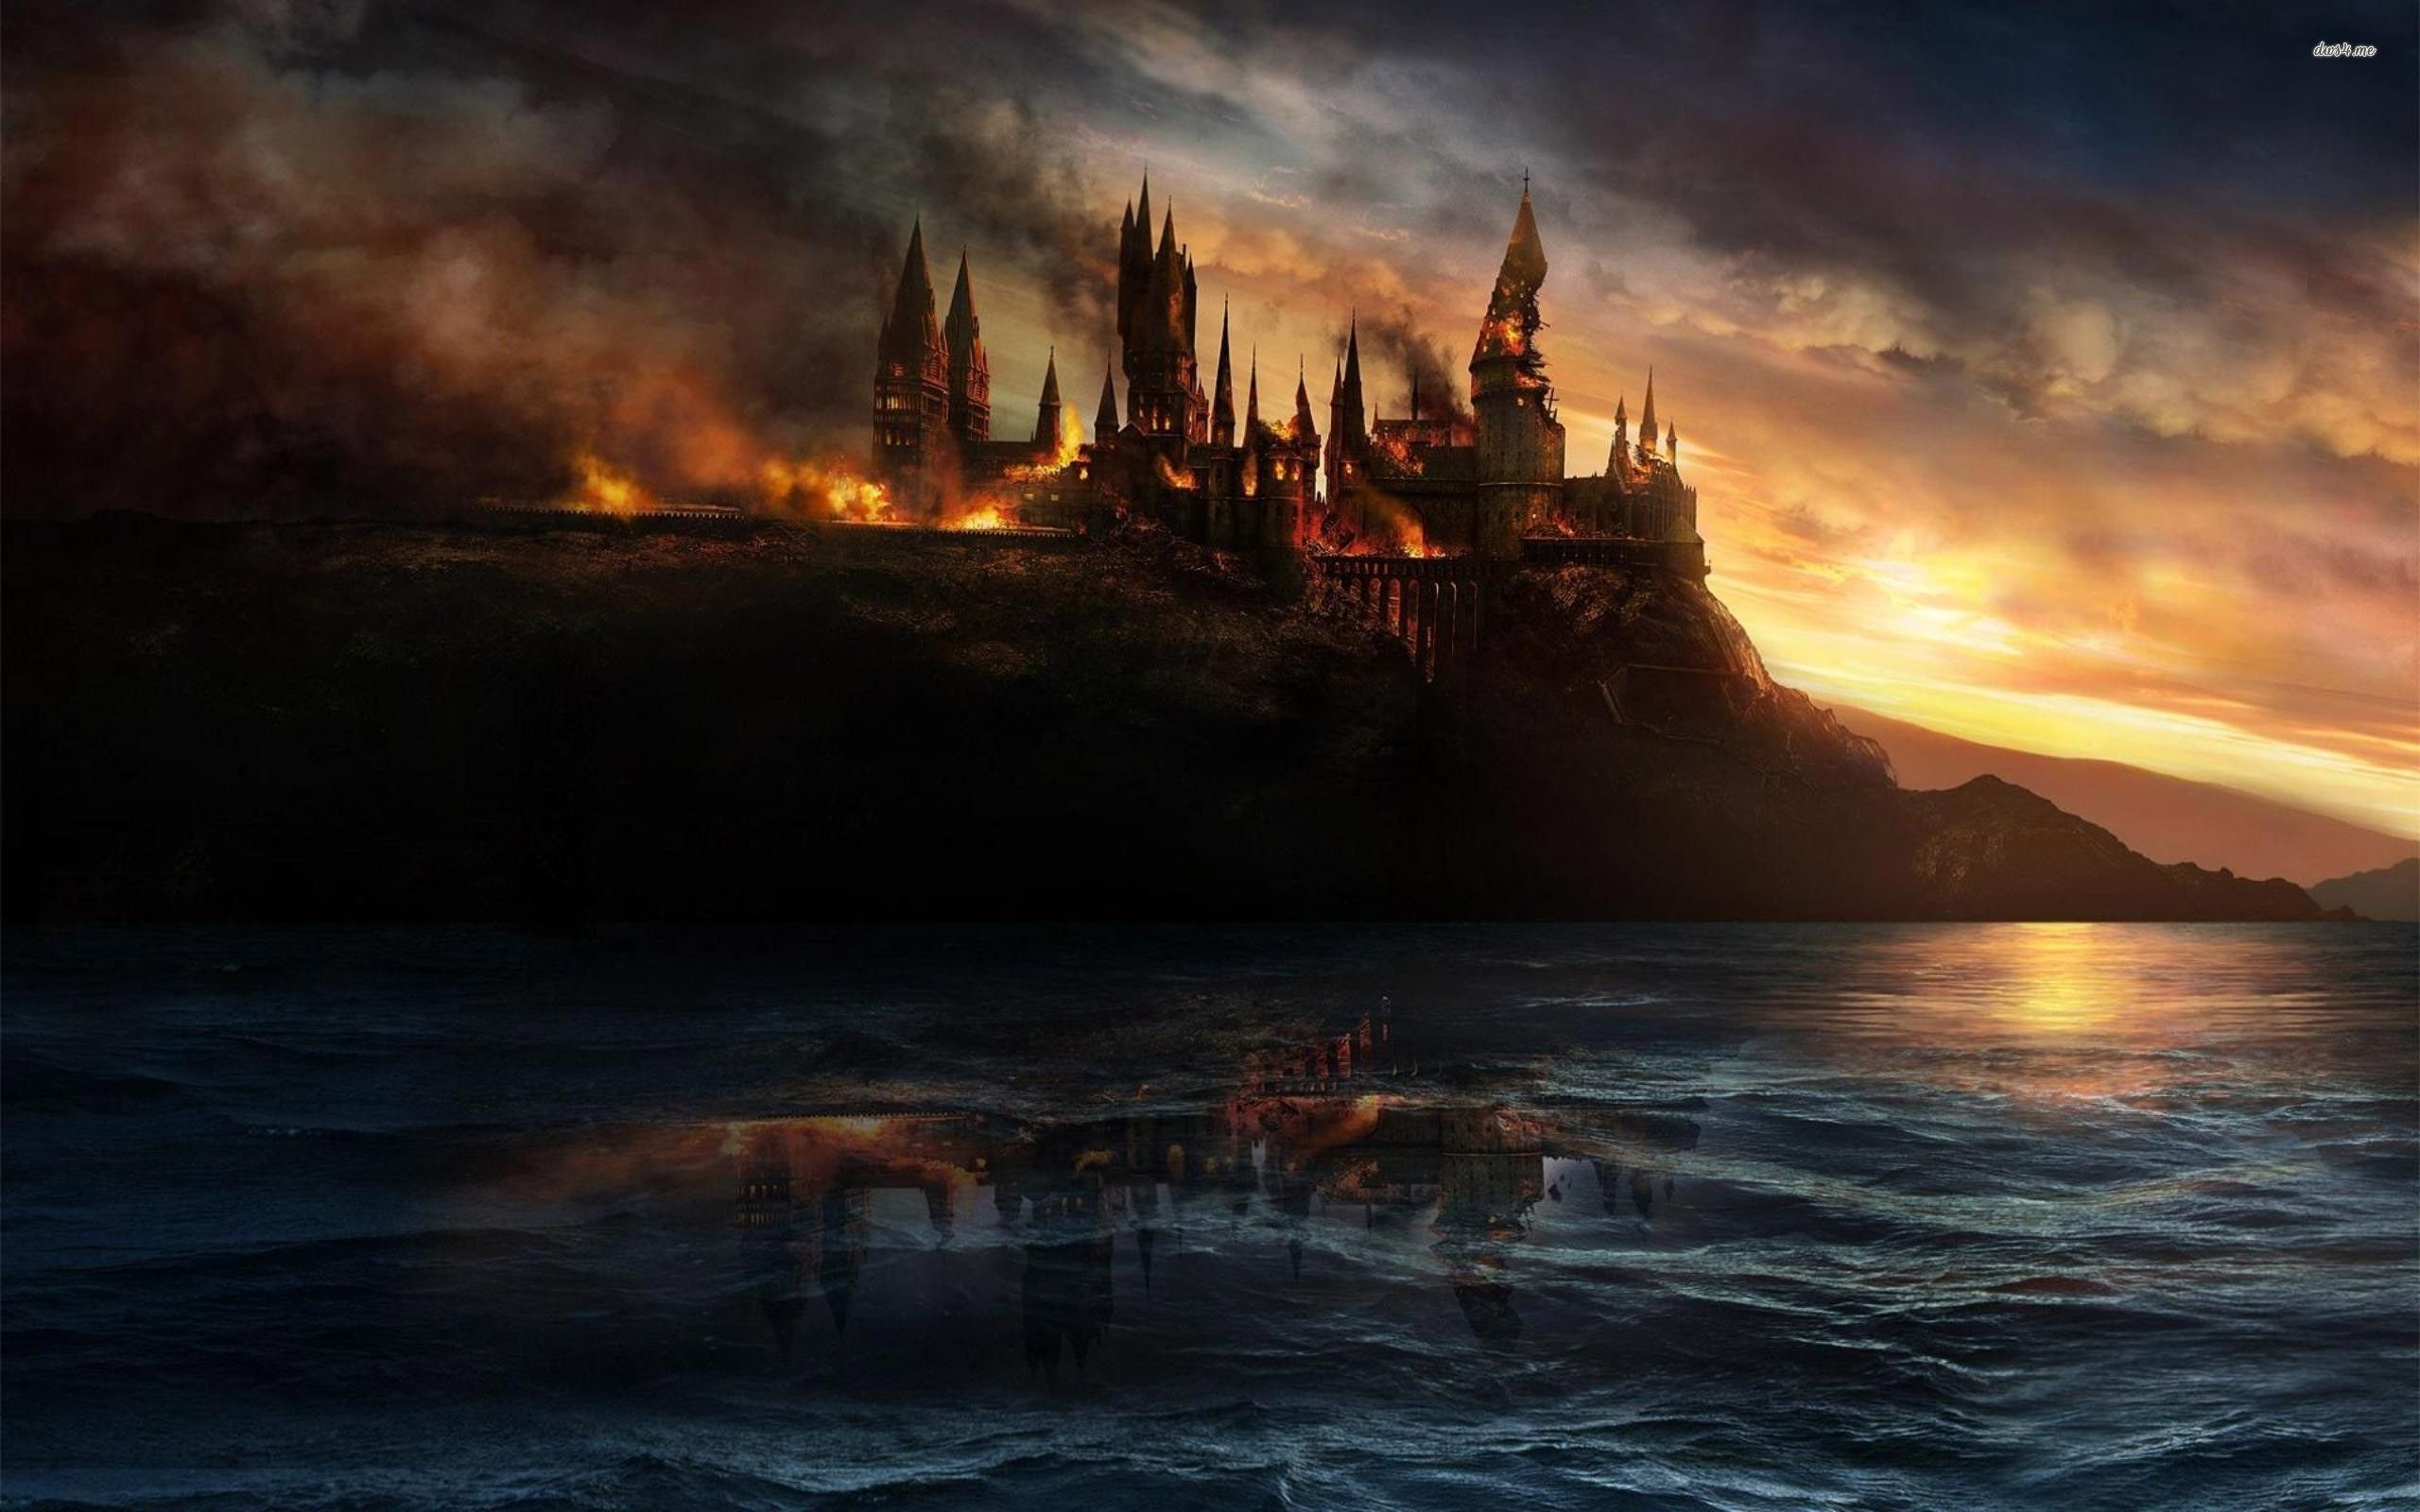 Hogwarts in flames - Harry Potter and the Deathly Hallows ...